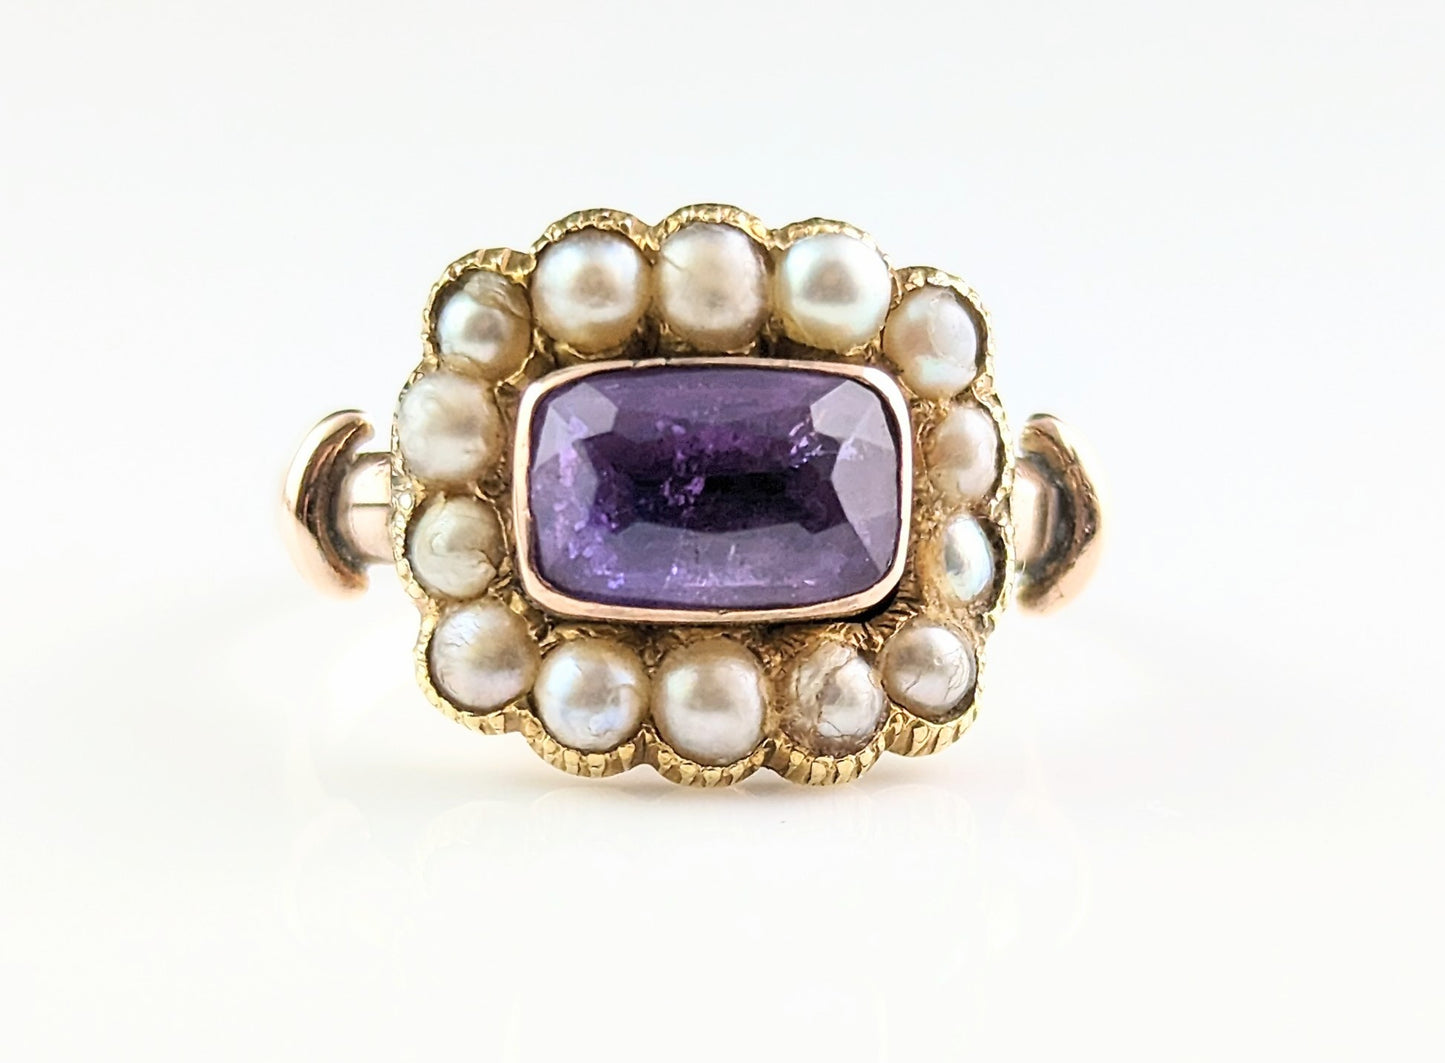 Antique George IV mourning ring, Amethyst and Pearl